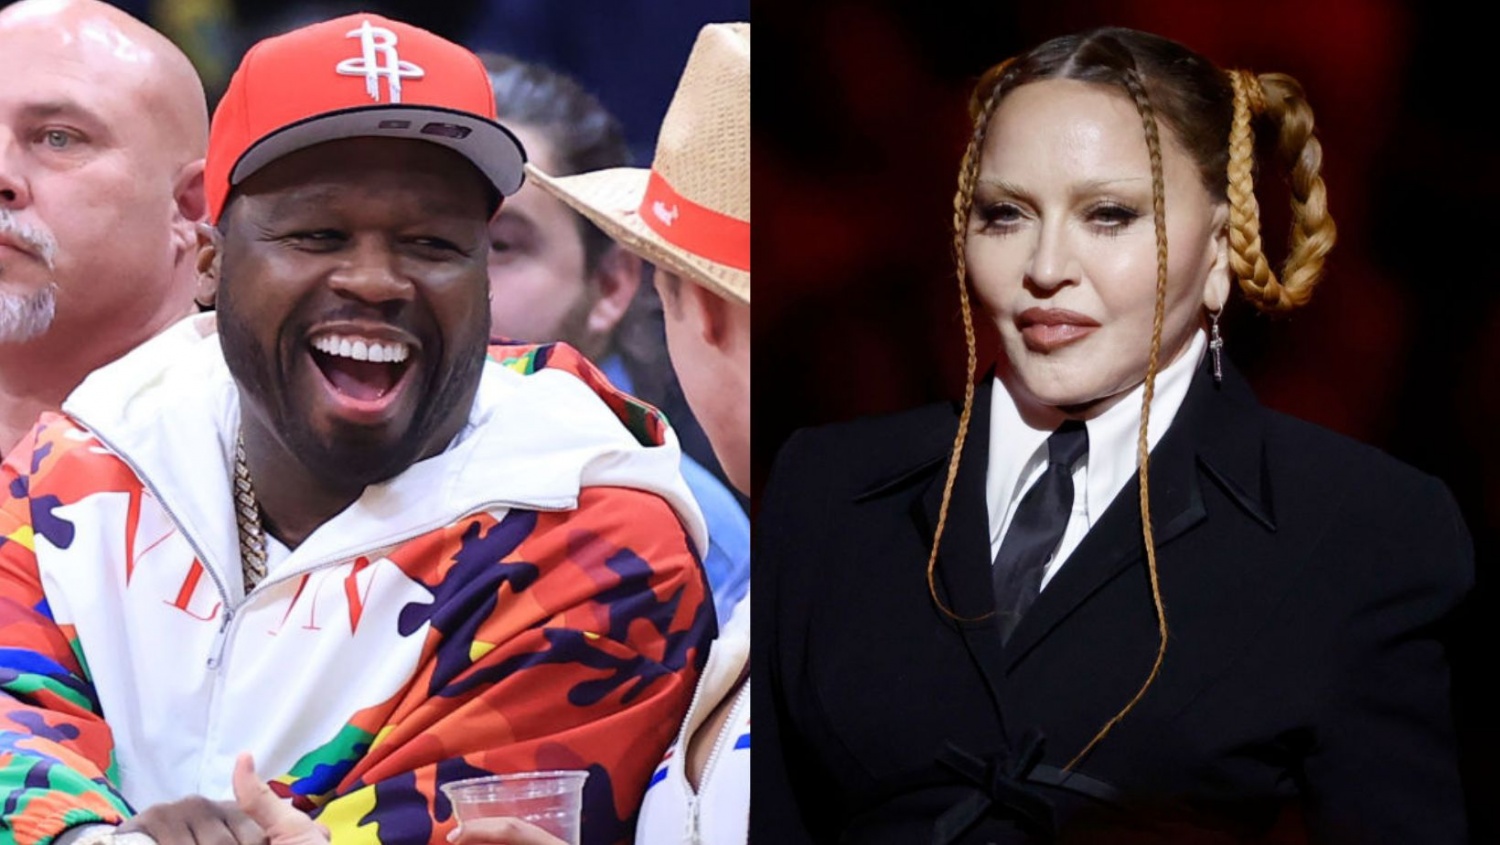 50 Cent Body-Shames Madonna: 'She Didn't Get It Fixed!'